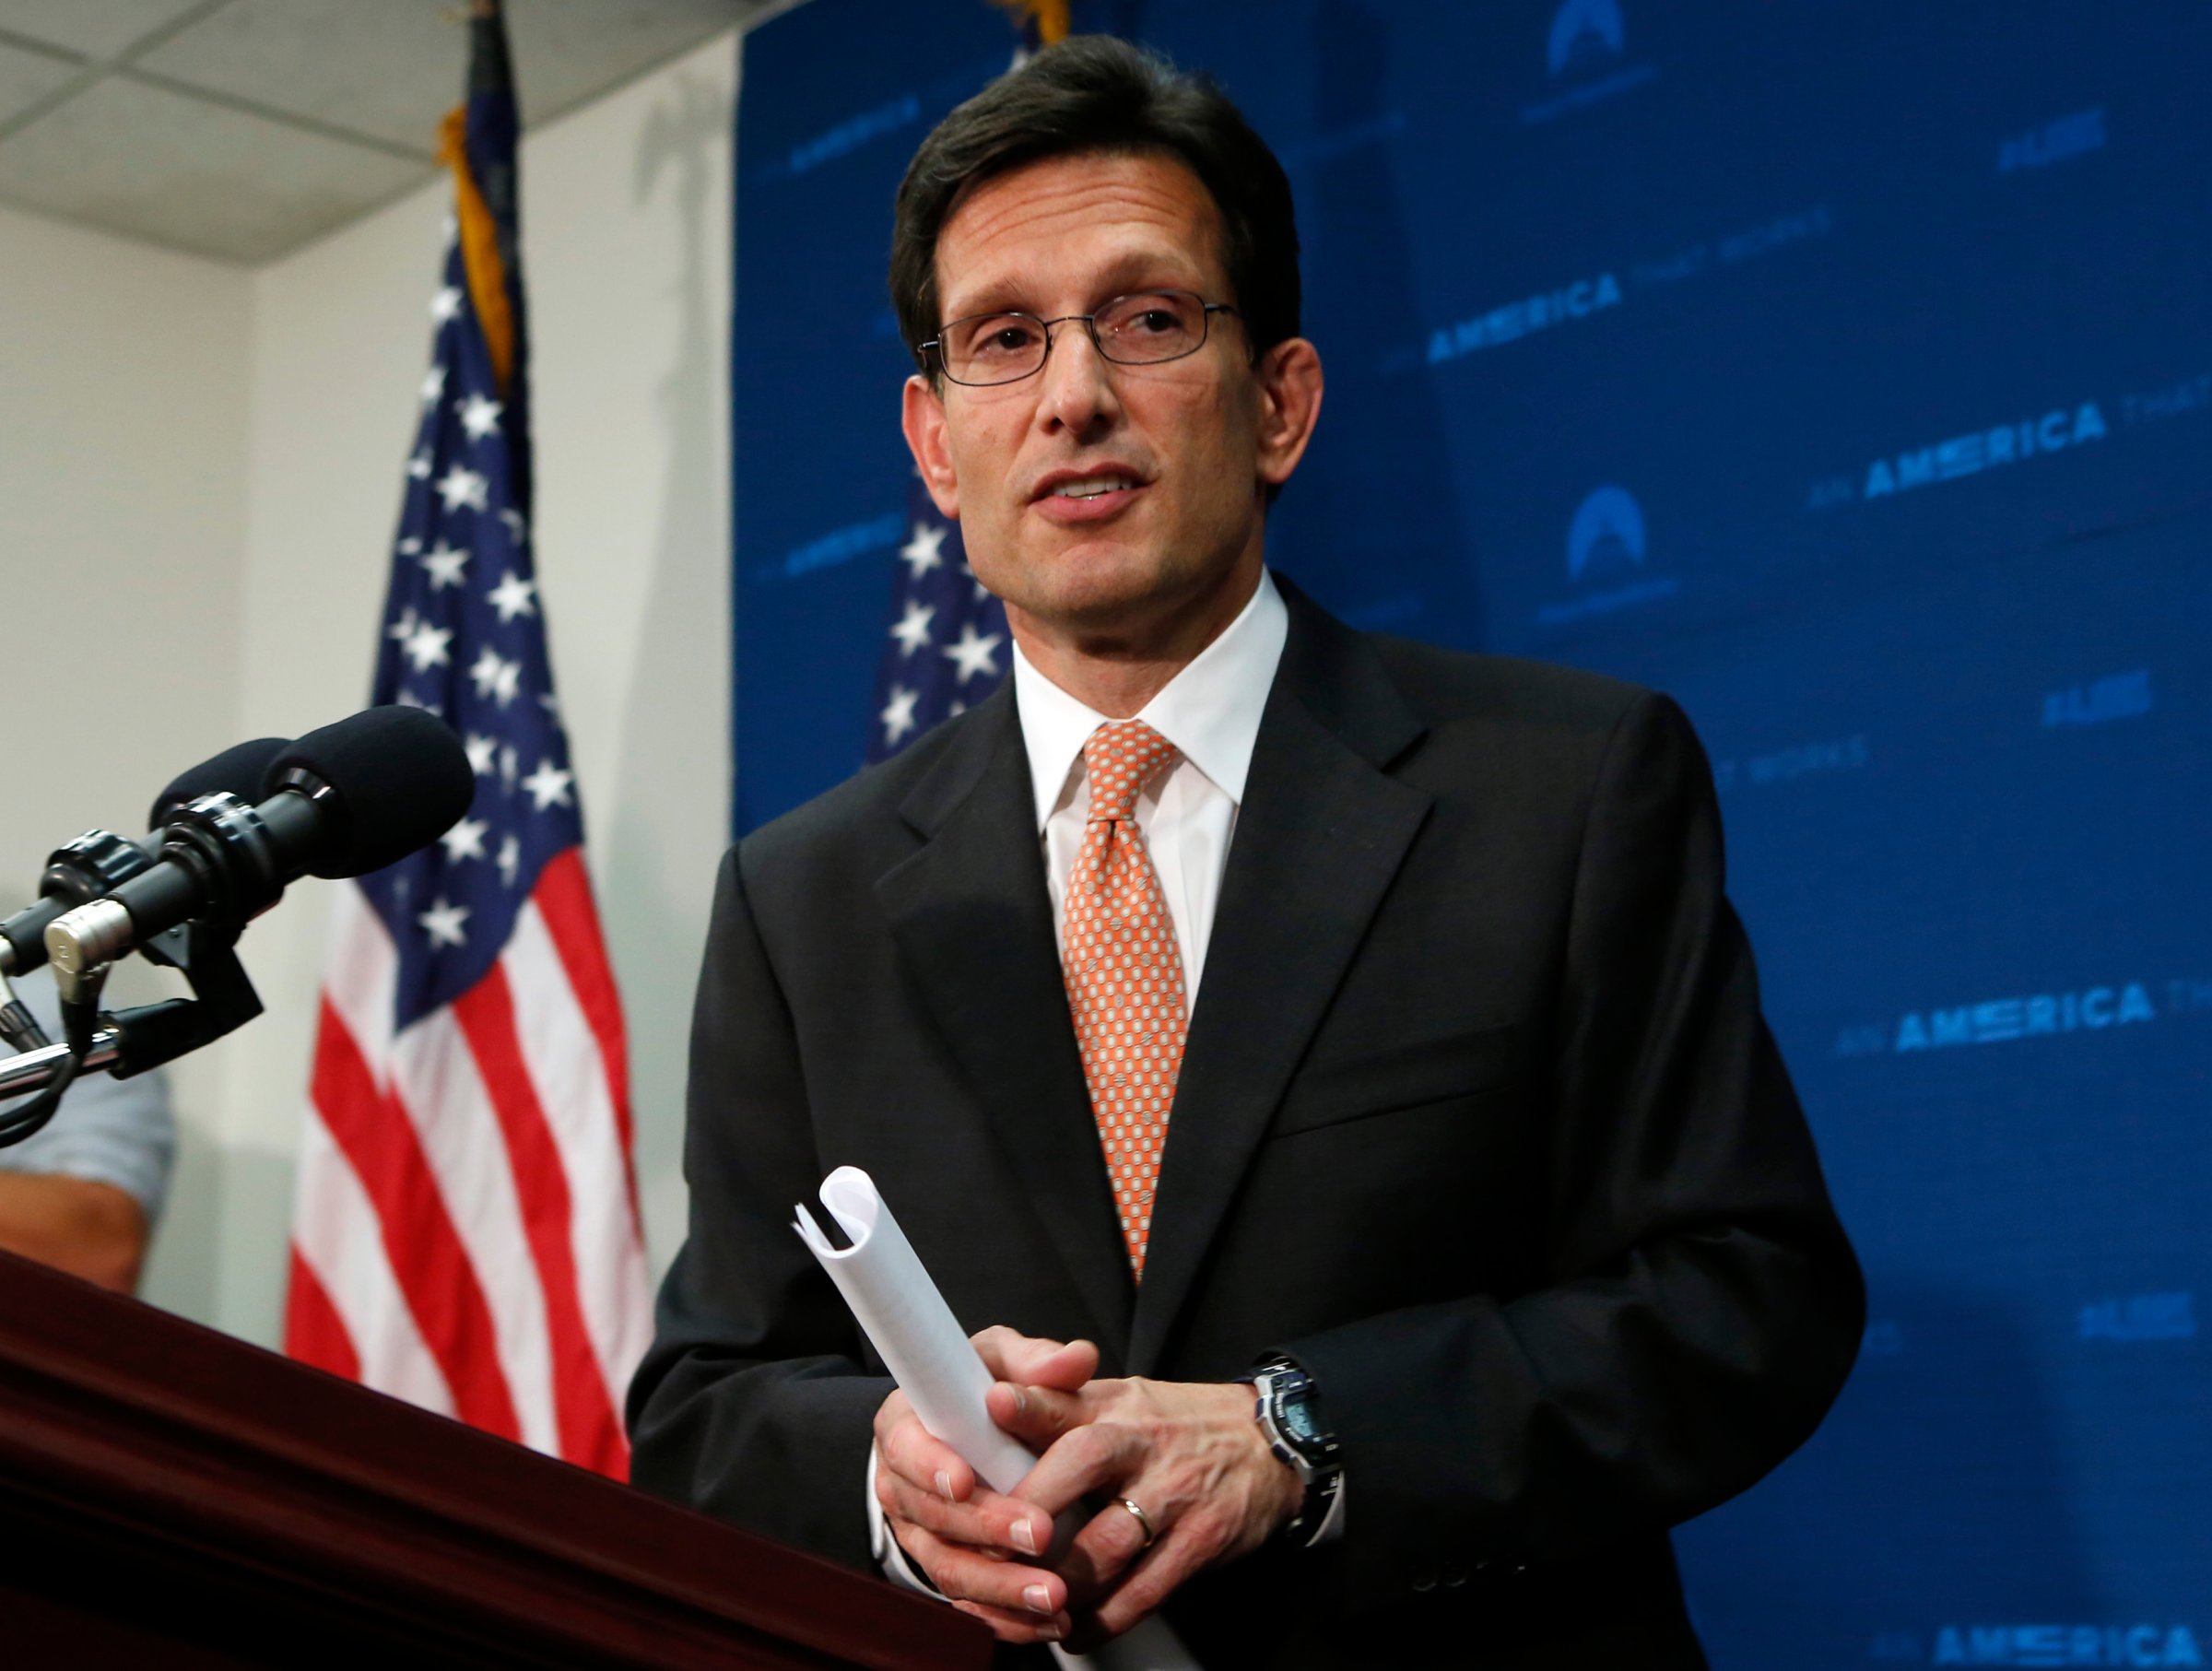 House Majority Leader Cantor leaves after a news conference